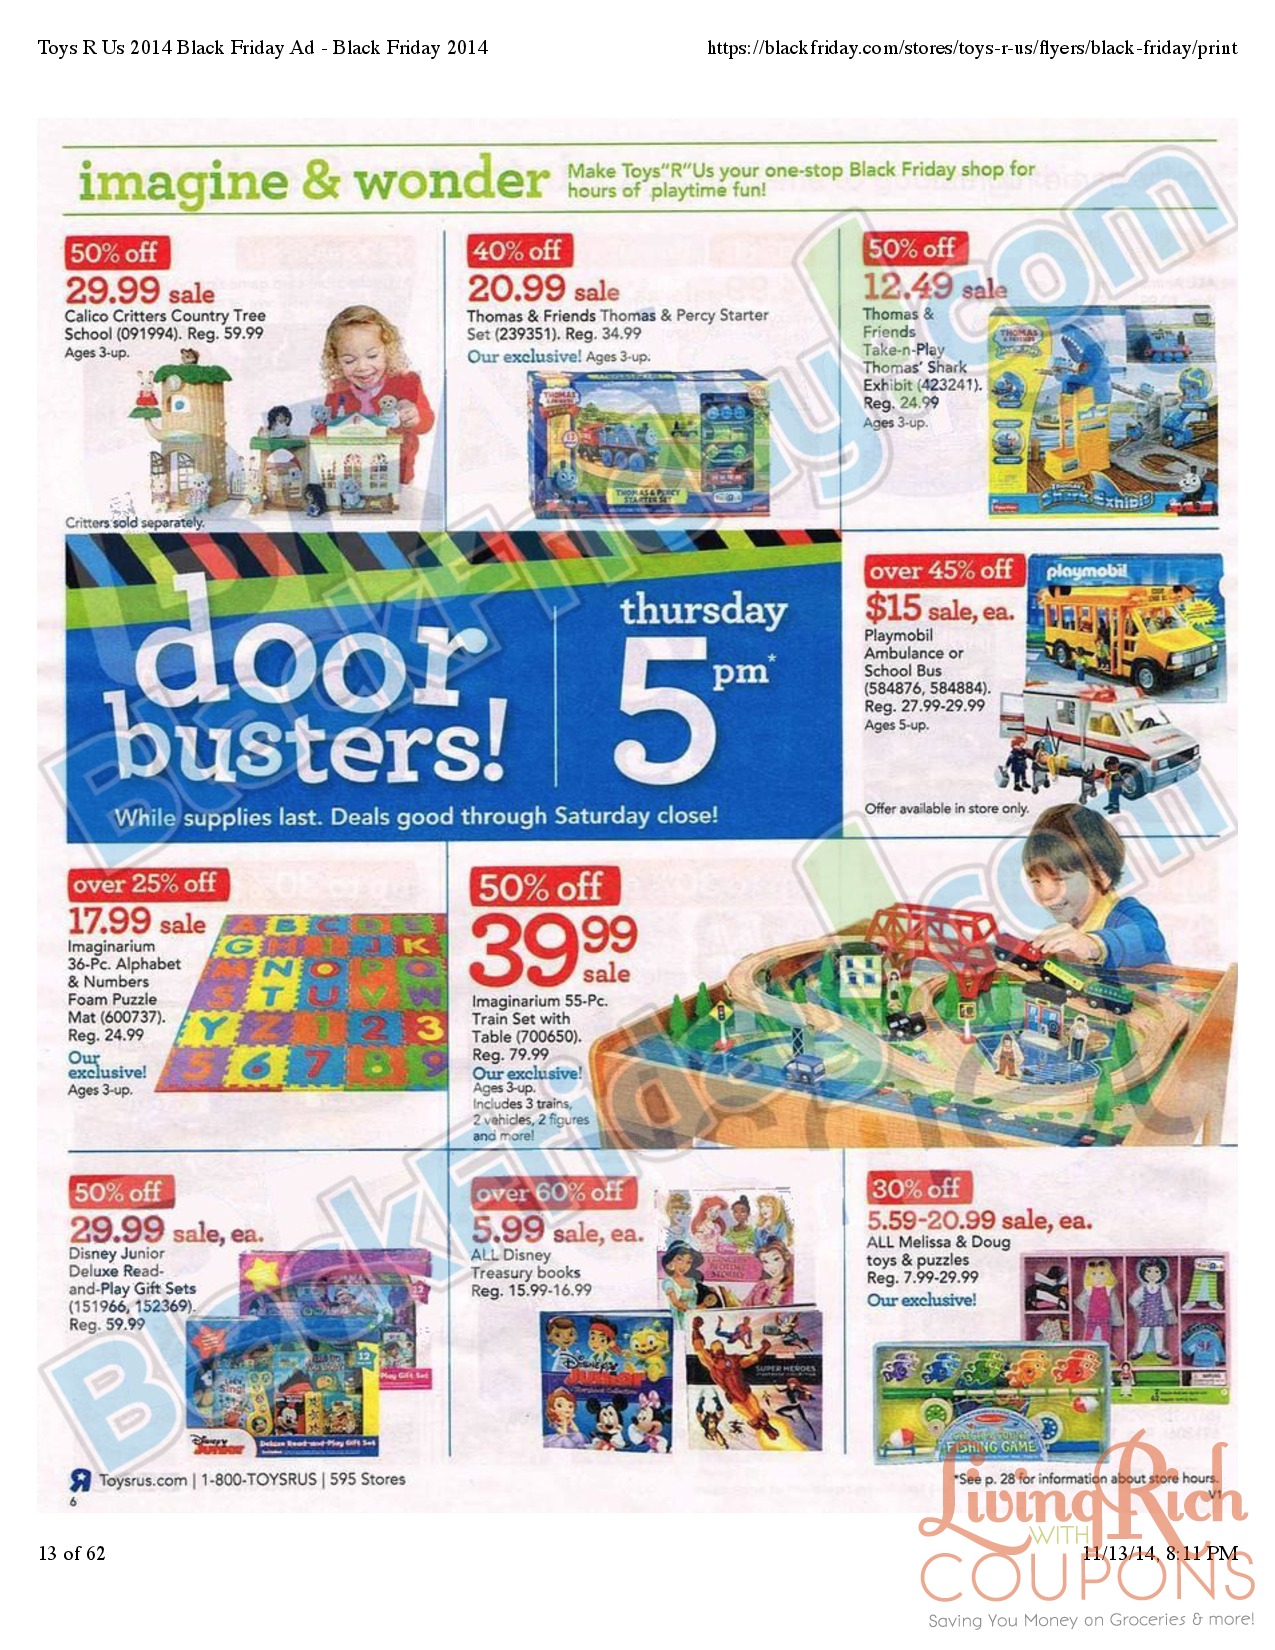 Toys R Us Black Friday Ad 2014, Black Friday Deals, Black Friday HoursLiving Rich With Coupons®